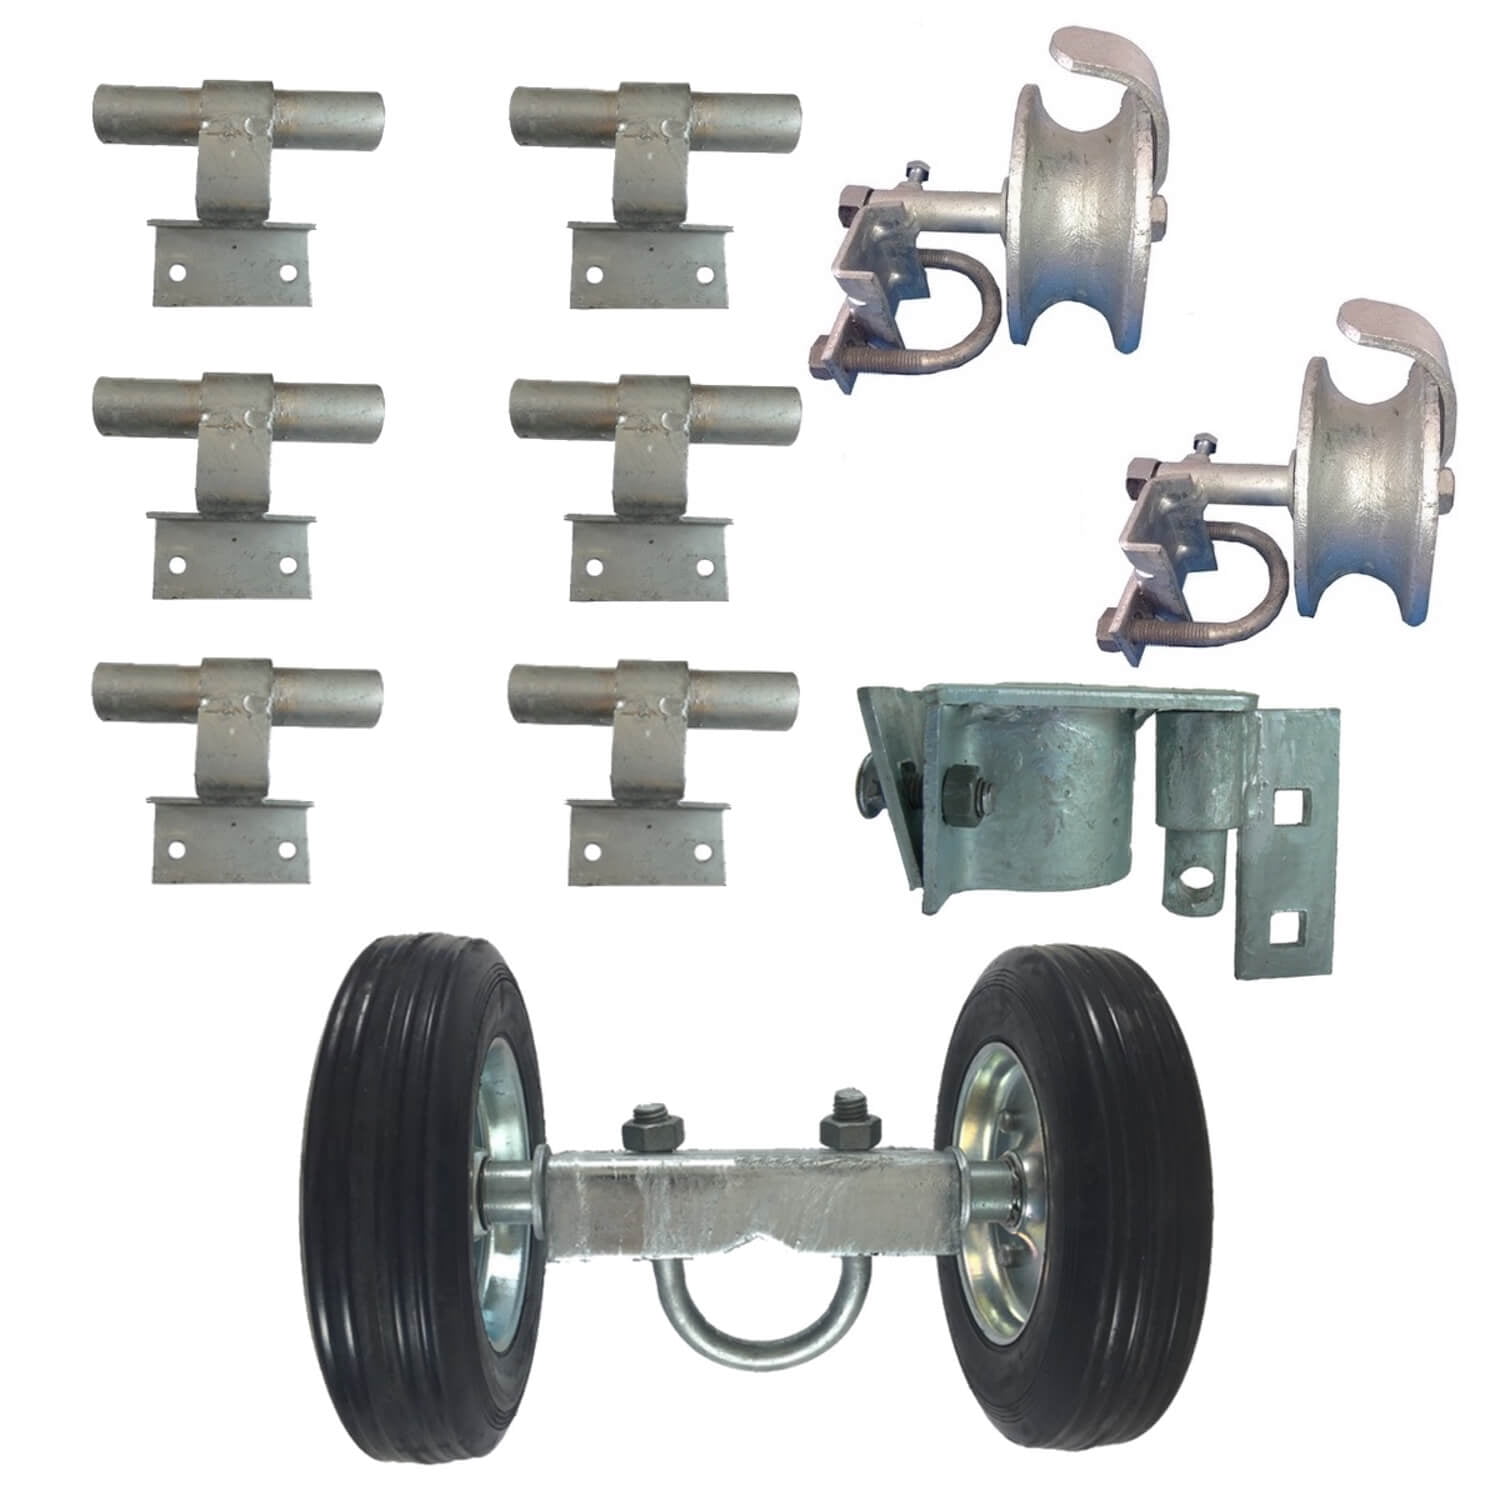 Chain Link Rolling Gate Hardware Parts Kit 